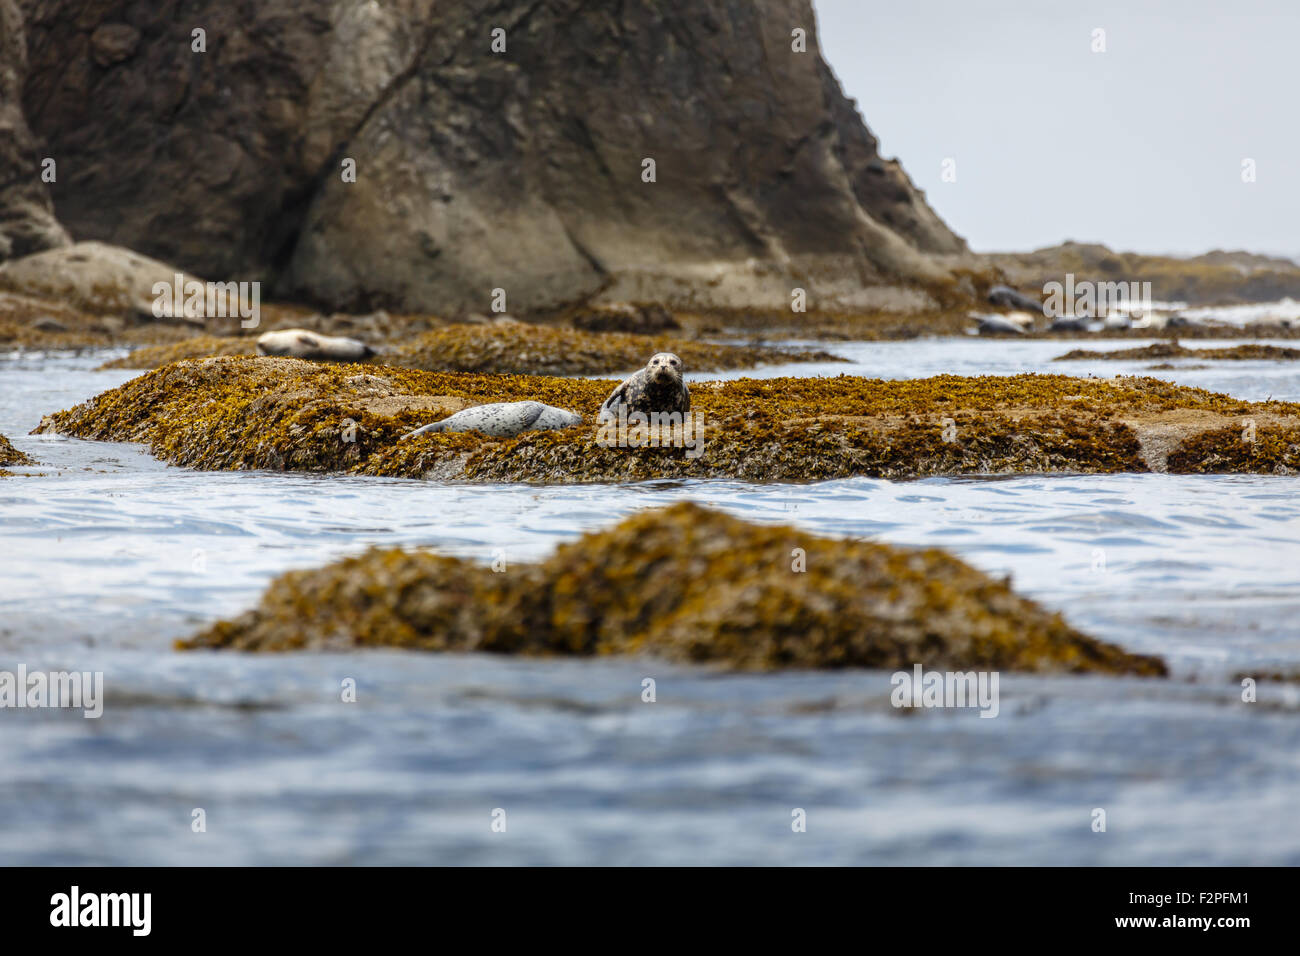 Seals resting on rocks offshore Stock Photo